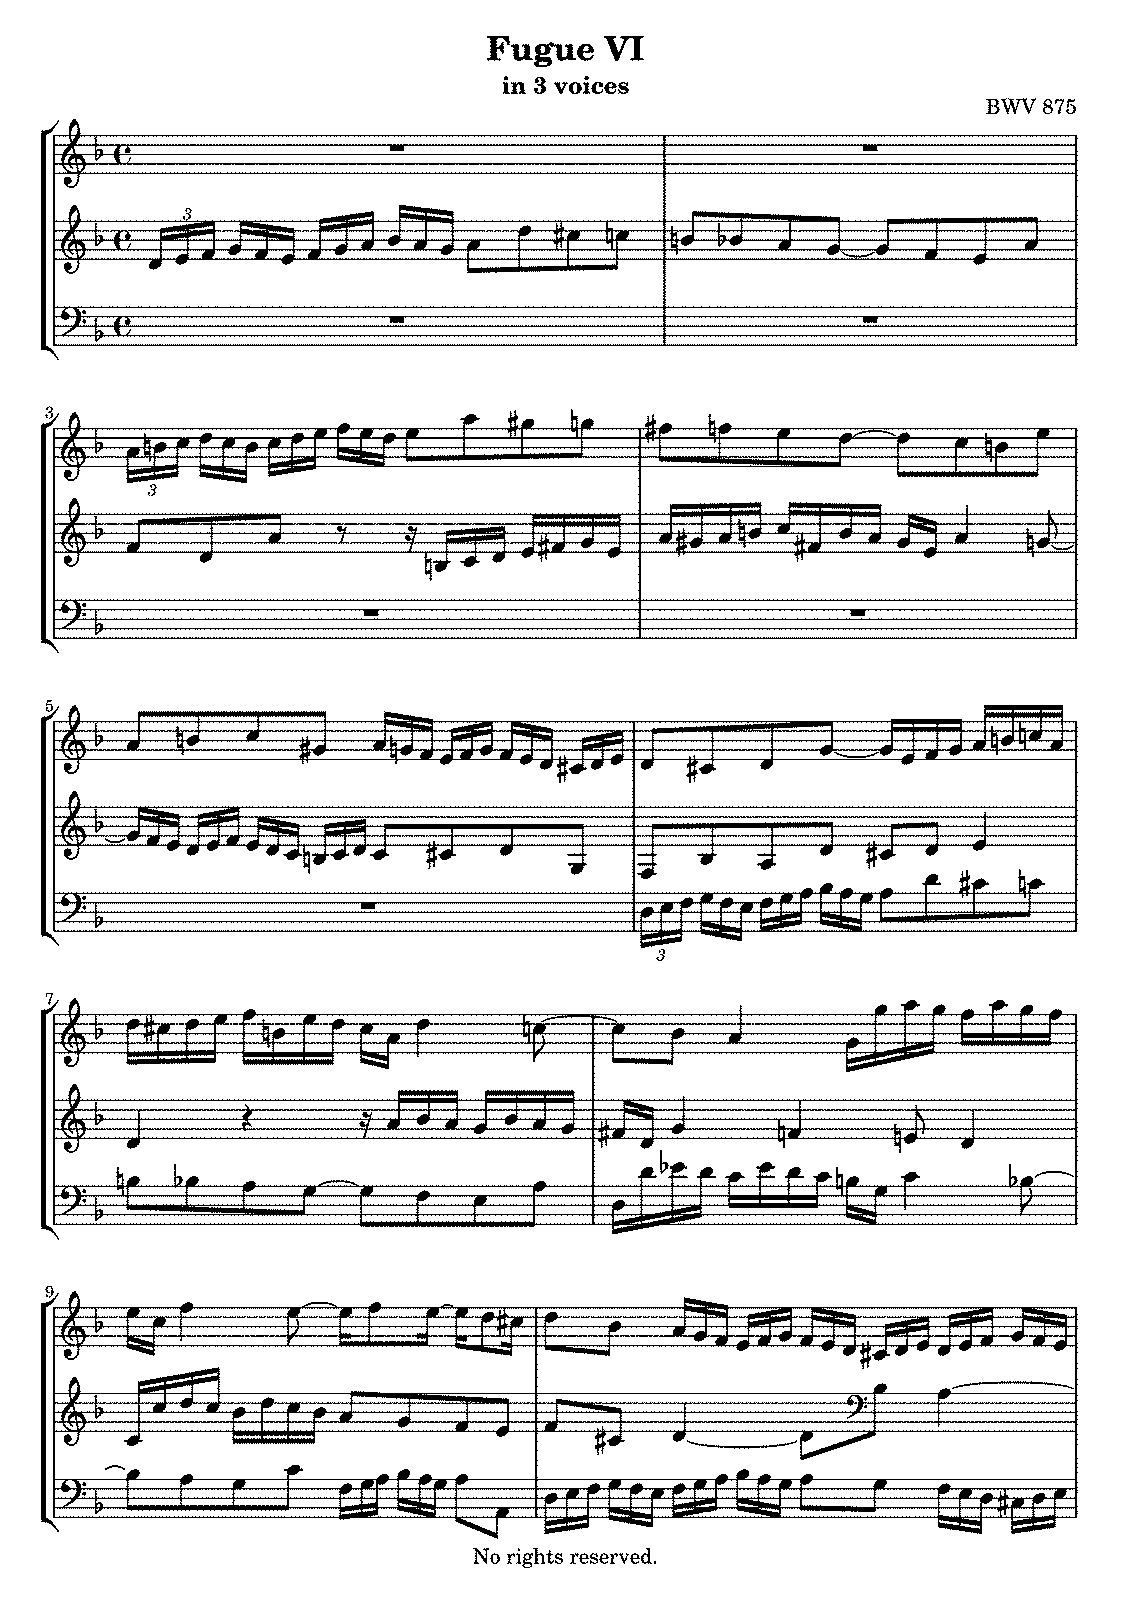 bach prelude and fugue in d minor book 1